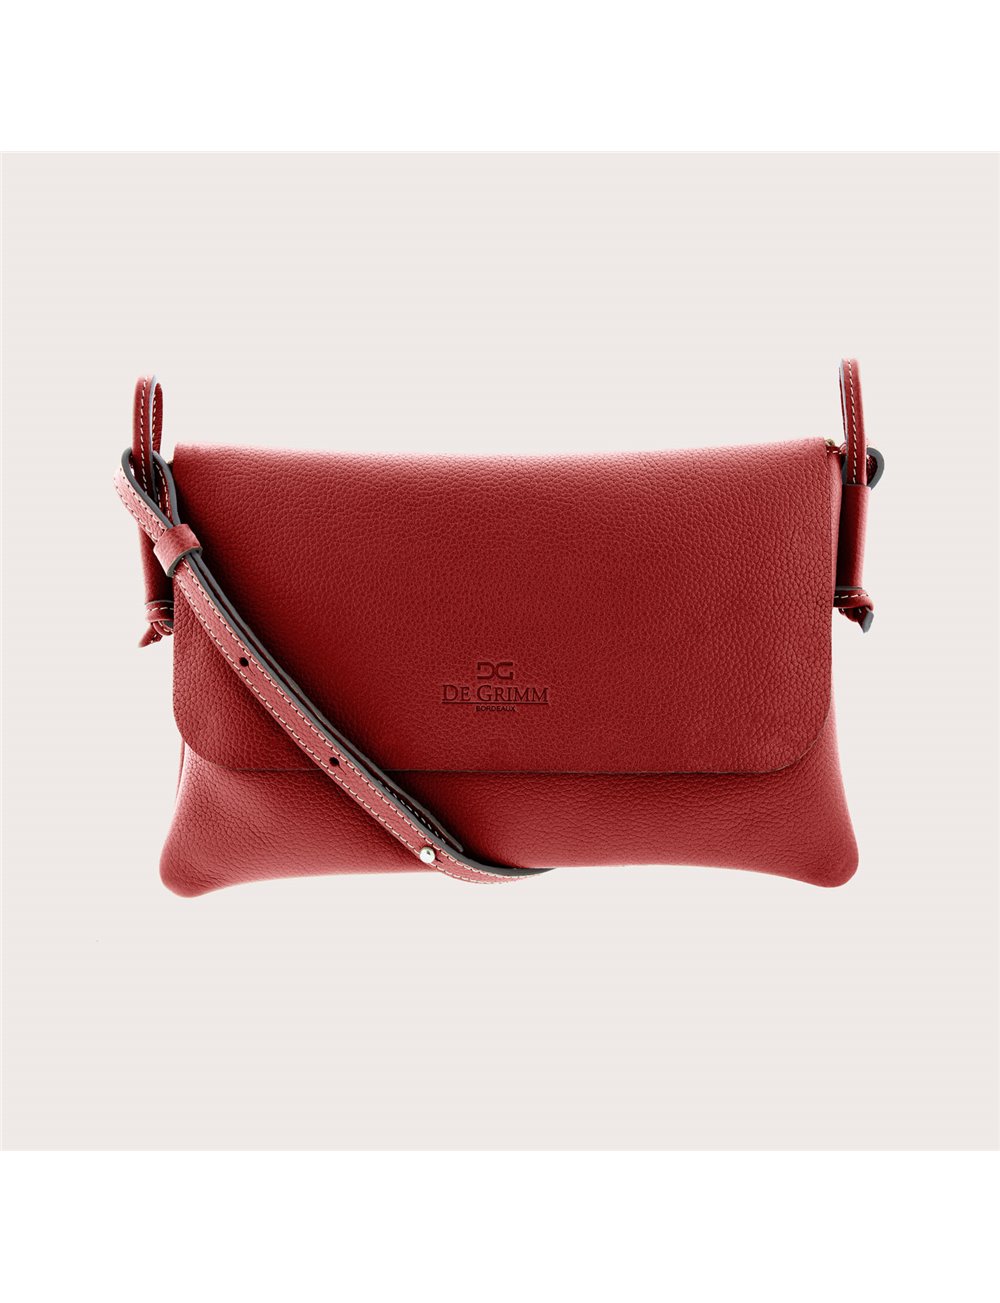 COACH Cross Town Leather Cross-Body Bag in Red